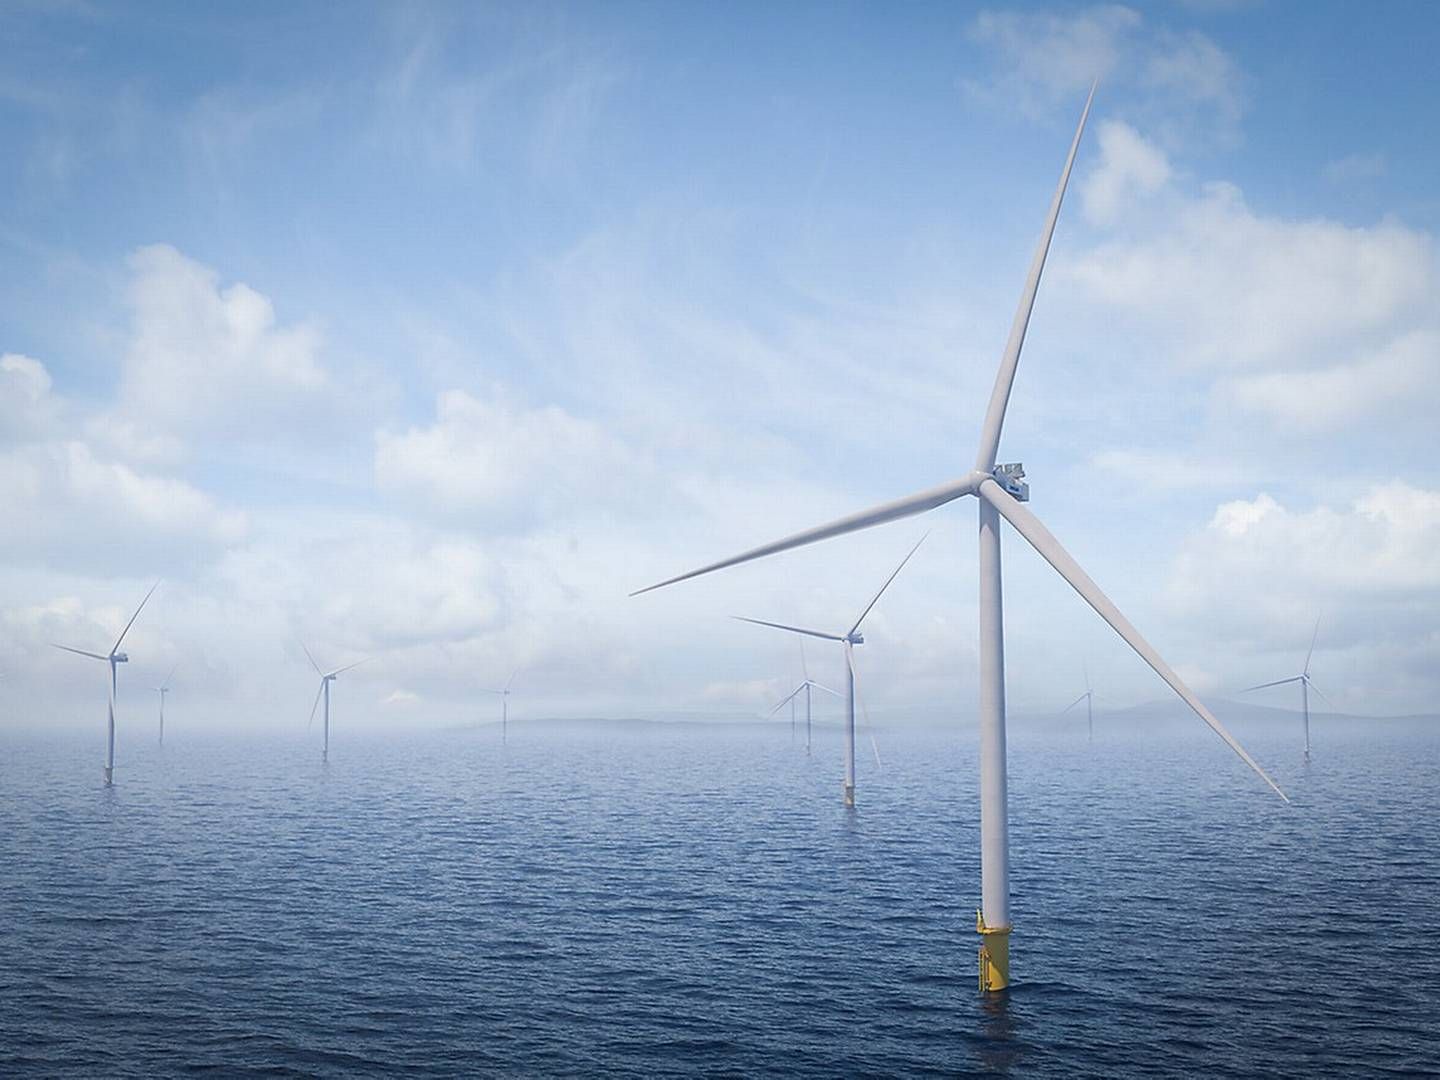 The offshore wind farm is dominated by Danish players. Vestas will supply the turbines for the project, which Cadeler will install. NKT will be responsible for the cable system, while Bladt and Semco Maritime will supply two substations. | Foto: vestas